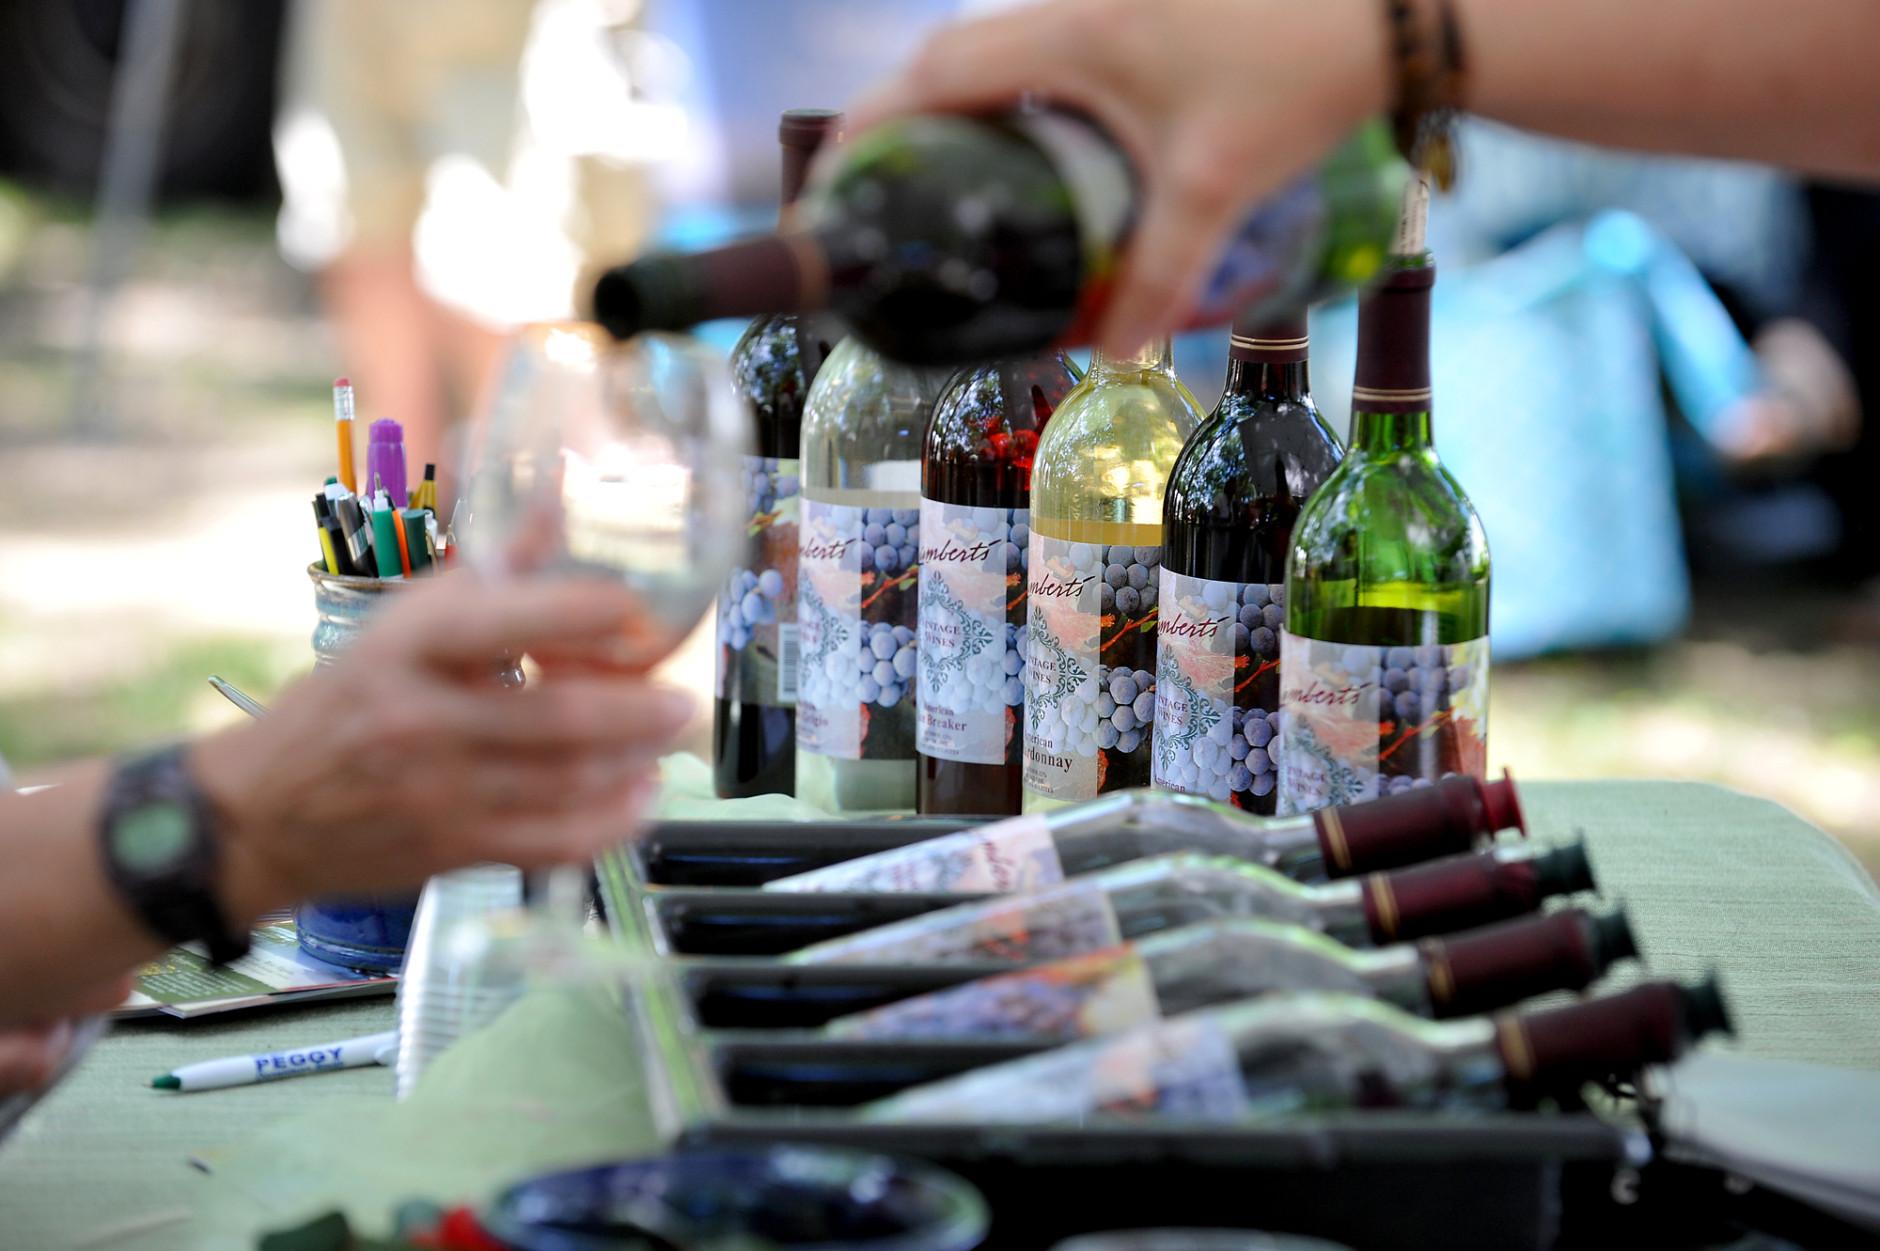 Bottles of wine out for the tasting from Lambert's Vintage Wines are poured during the Food and Wine Festival at Daniels Vineyards in Crab Orchard, W.Va., Saturday, June 20, 2015. (AP Photo/Chris Tilley)